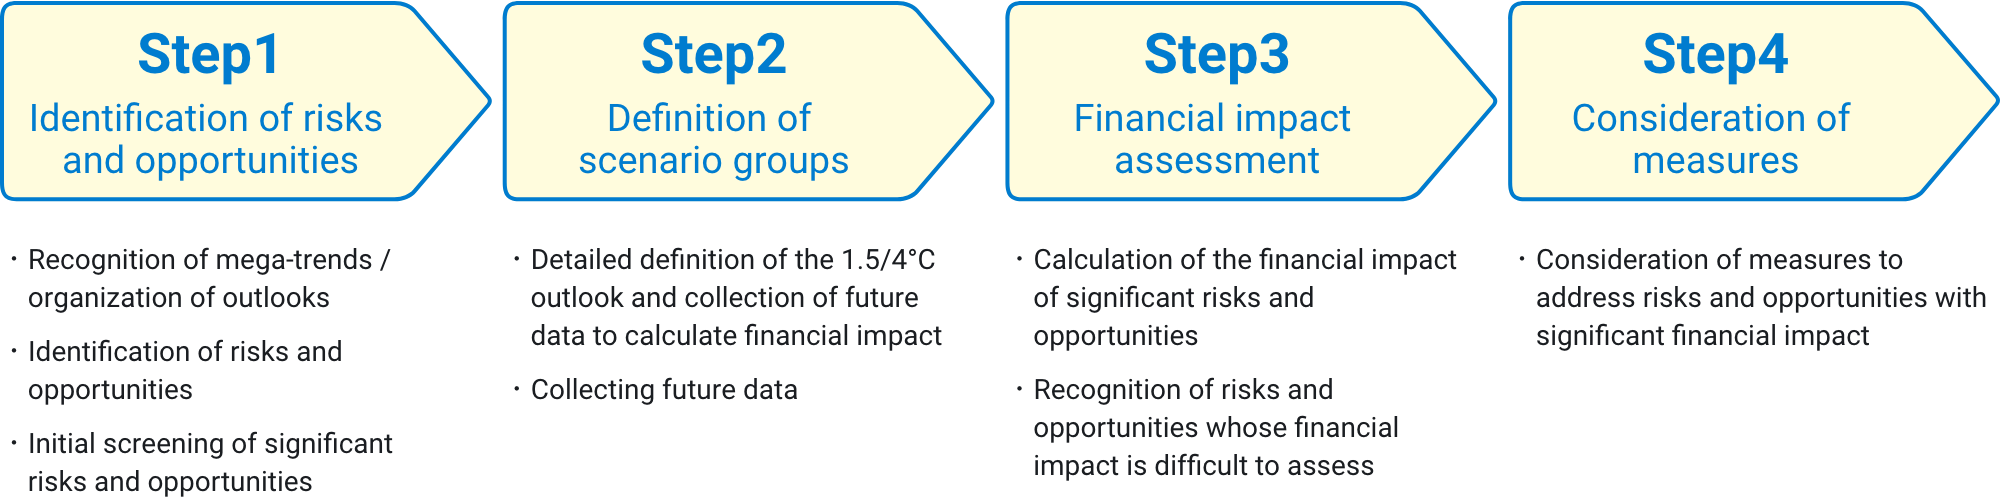 Step 1  Identify risks and opportunities  Step 2  Identify scenarios  Step 3  Assess financial impact  Step 4  Consider countermeasures